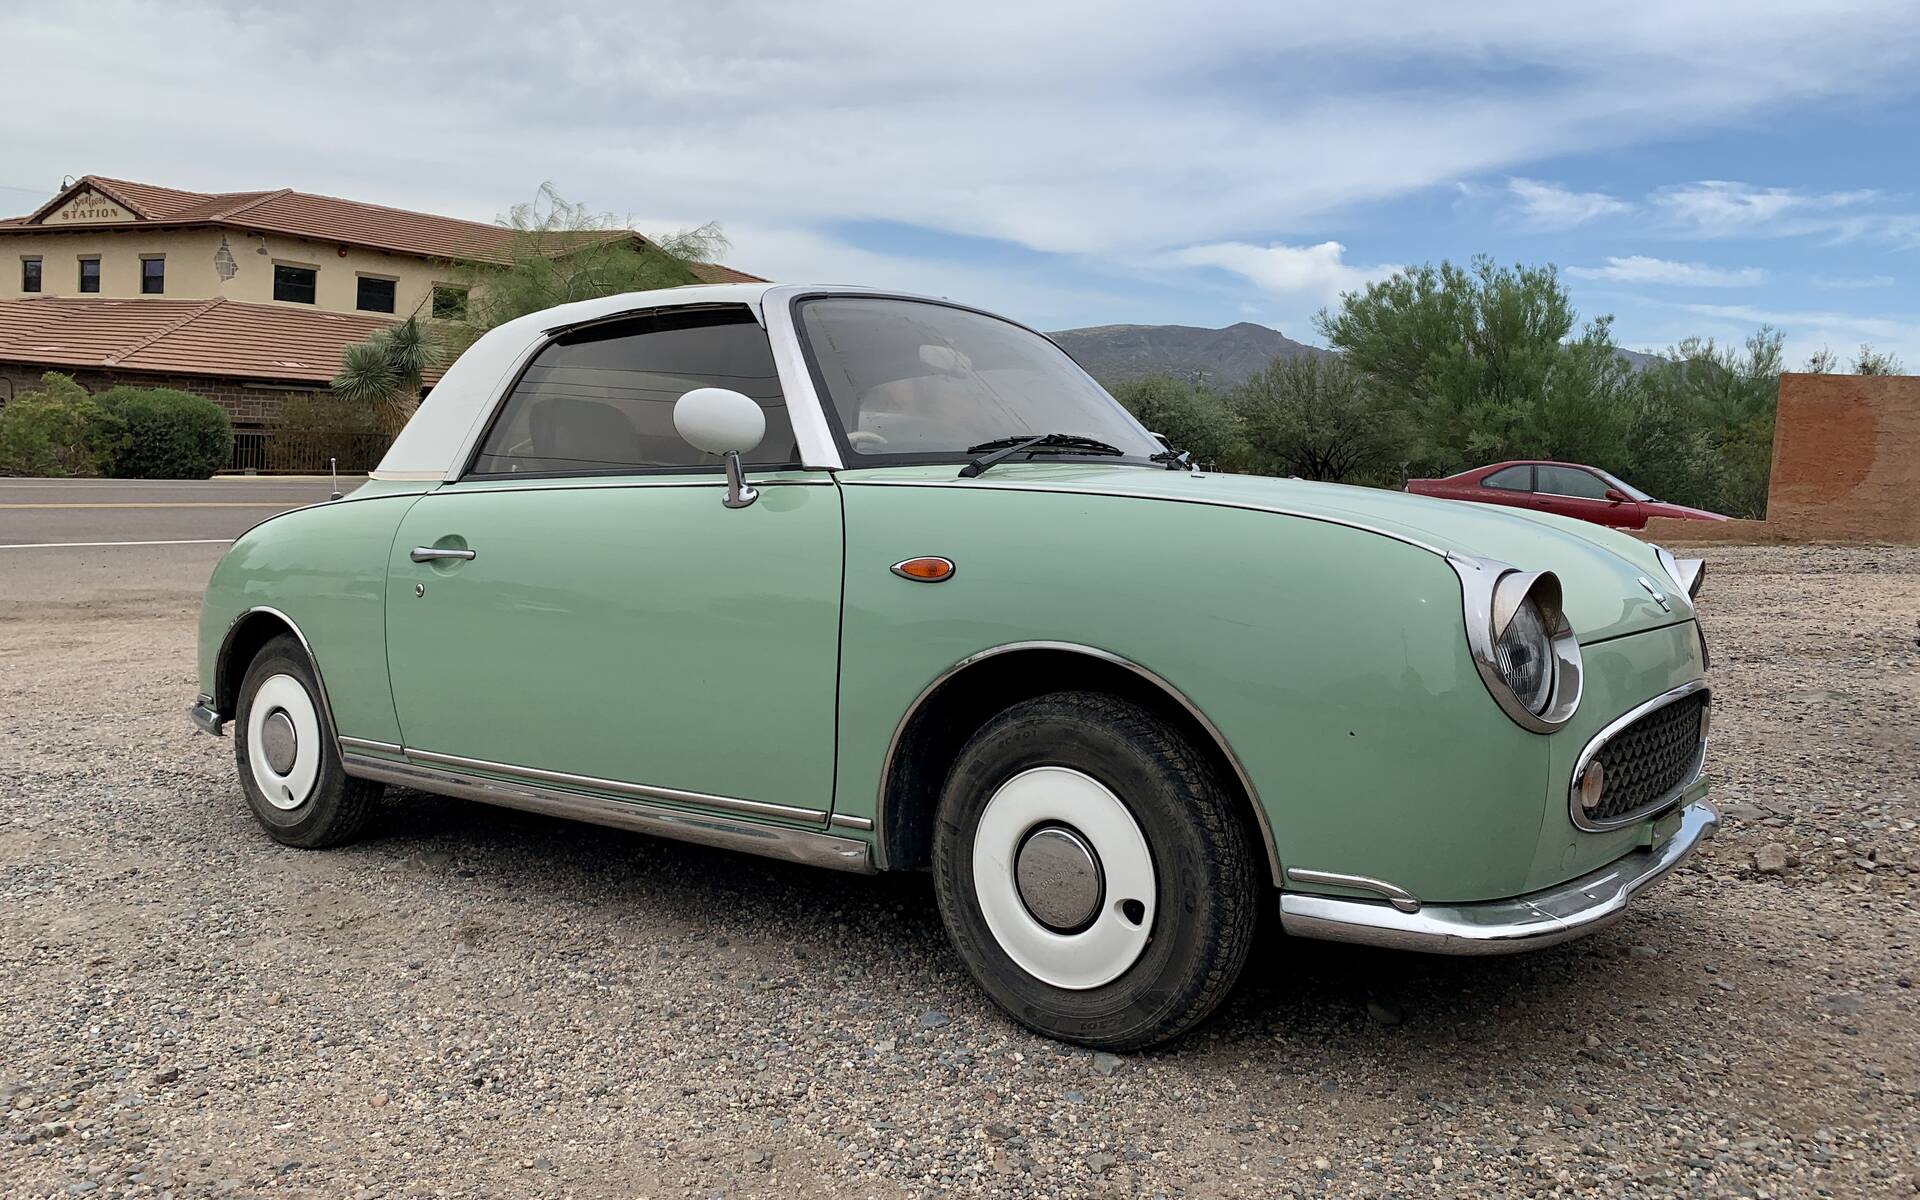 <p><strong>Nissan Figaro</strong></p>